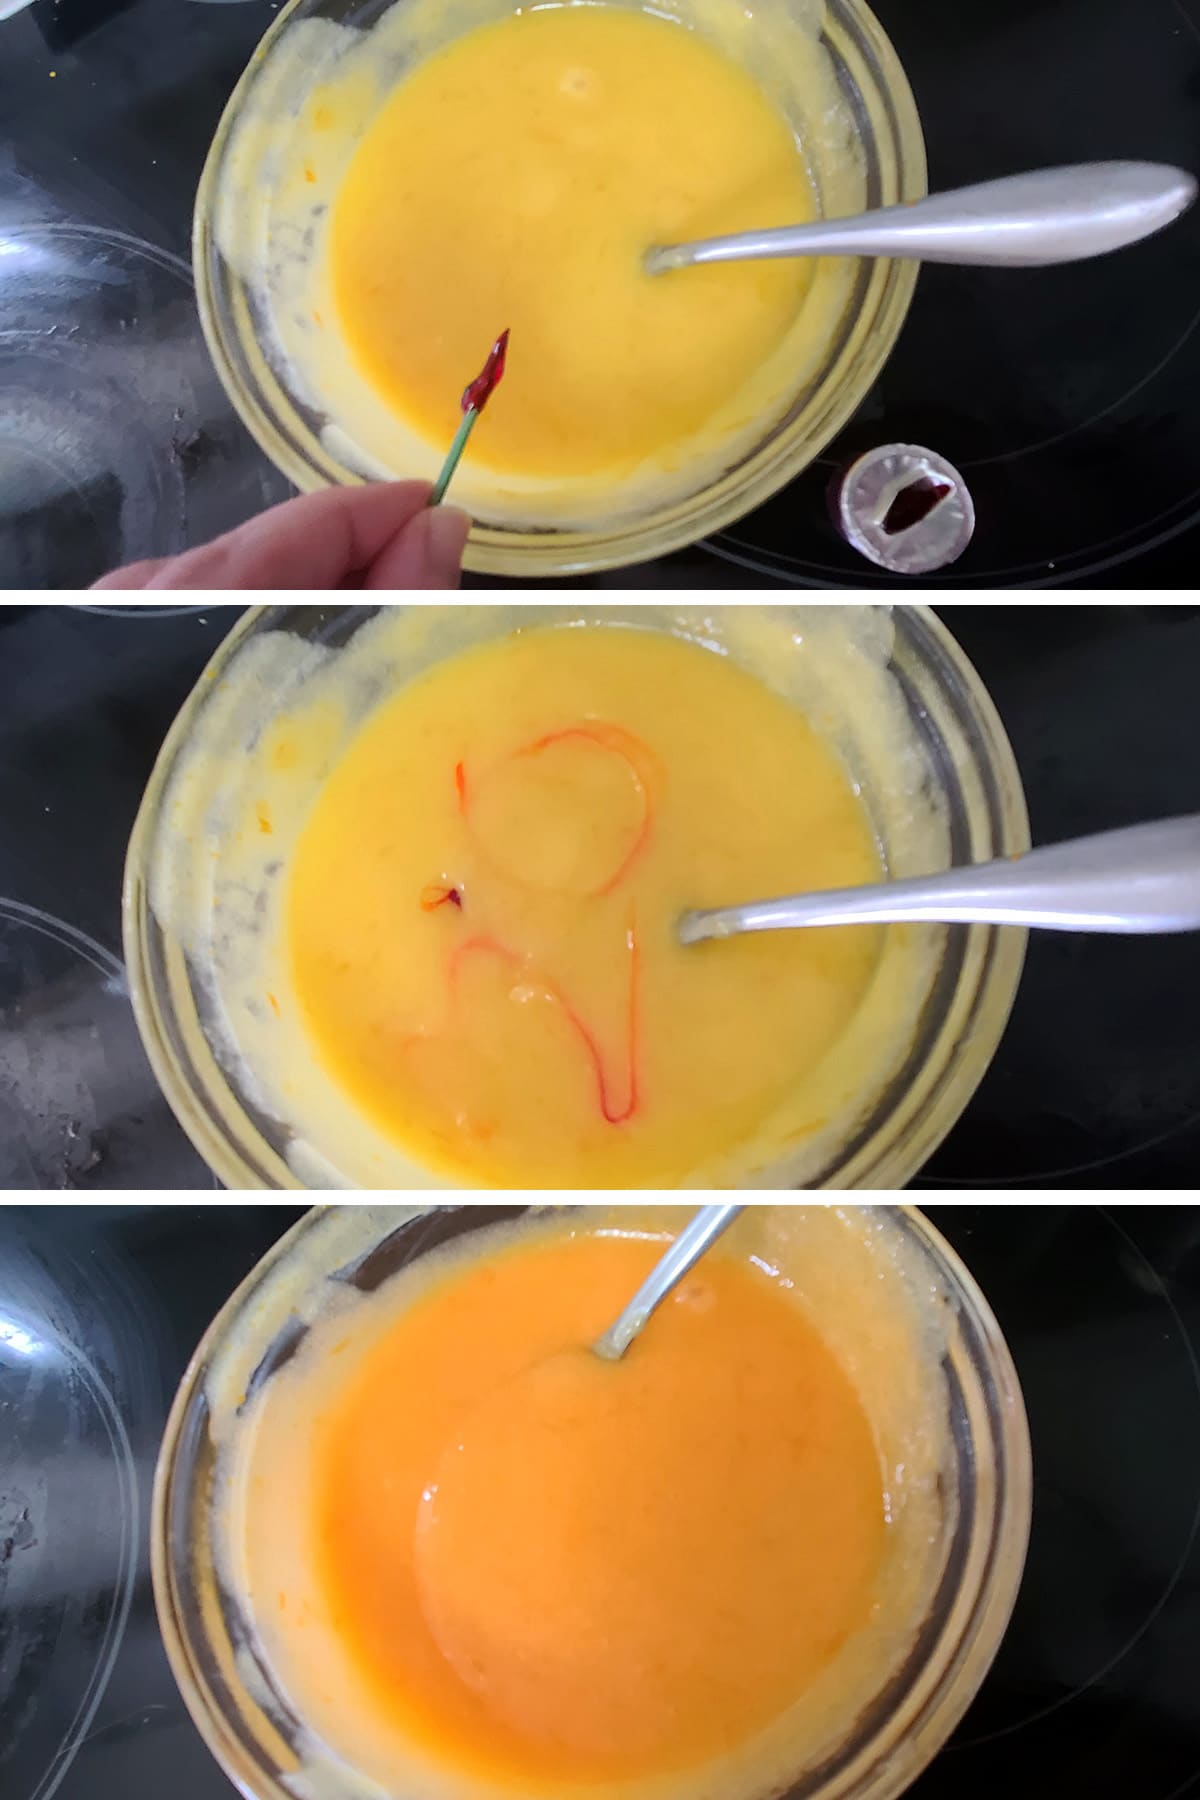 Orange food colouring being mixed into the curd.